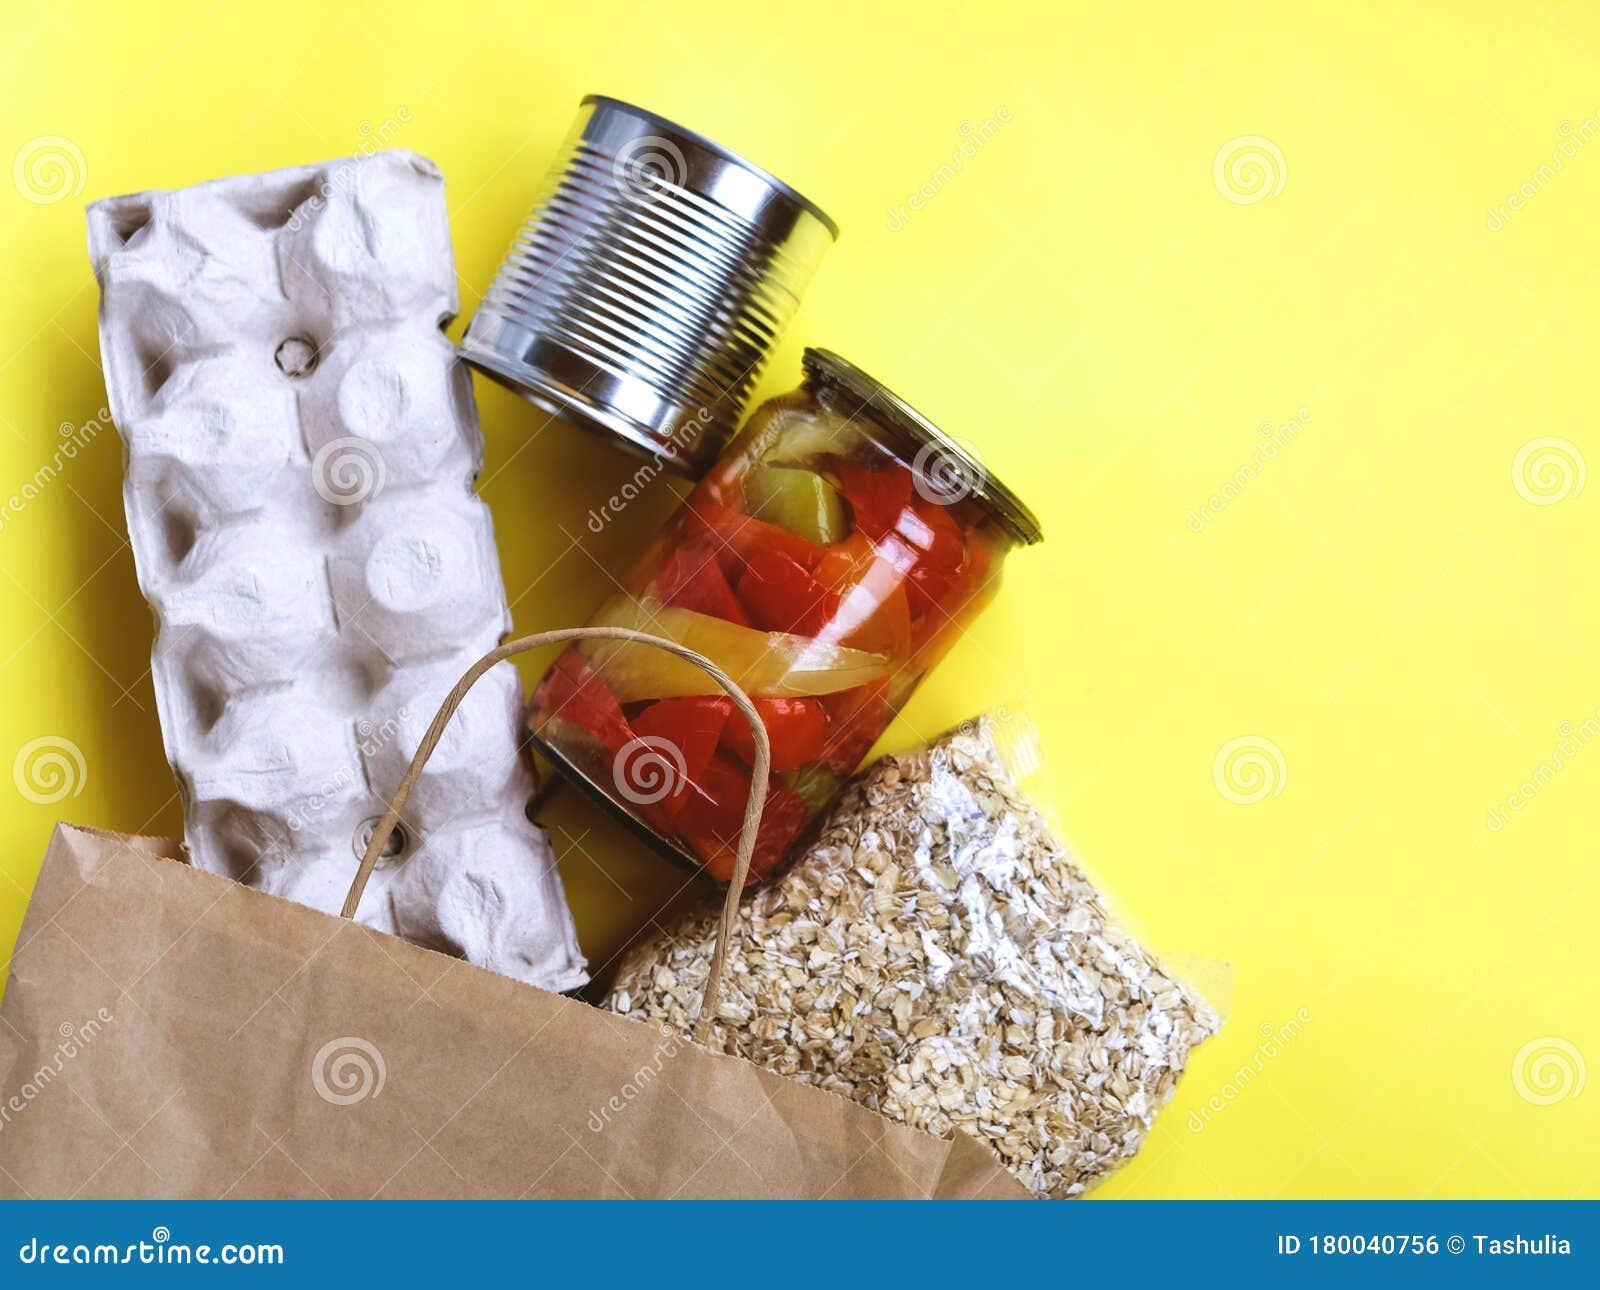 Download Food In A Paper Bag Eggs Canned Food And Oat Groats On A Yellow Background Stock Photo Image Of Care Groceries 180040756 Yellowimages Mockups